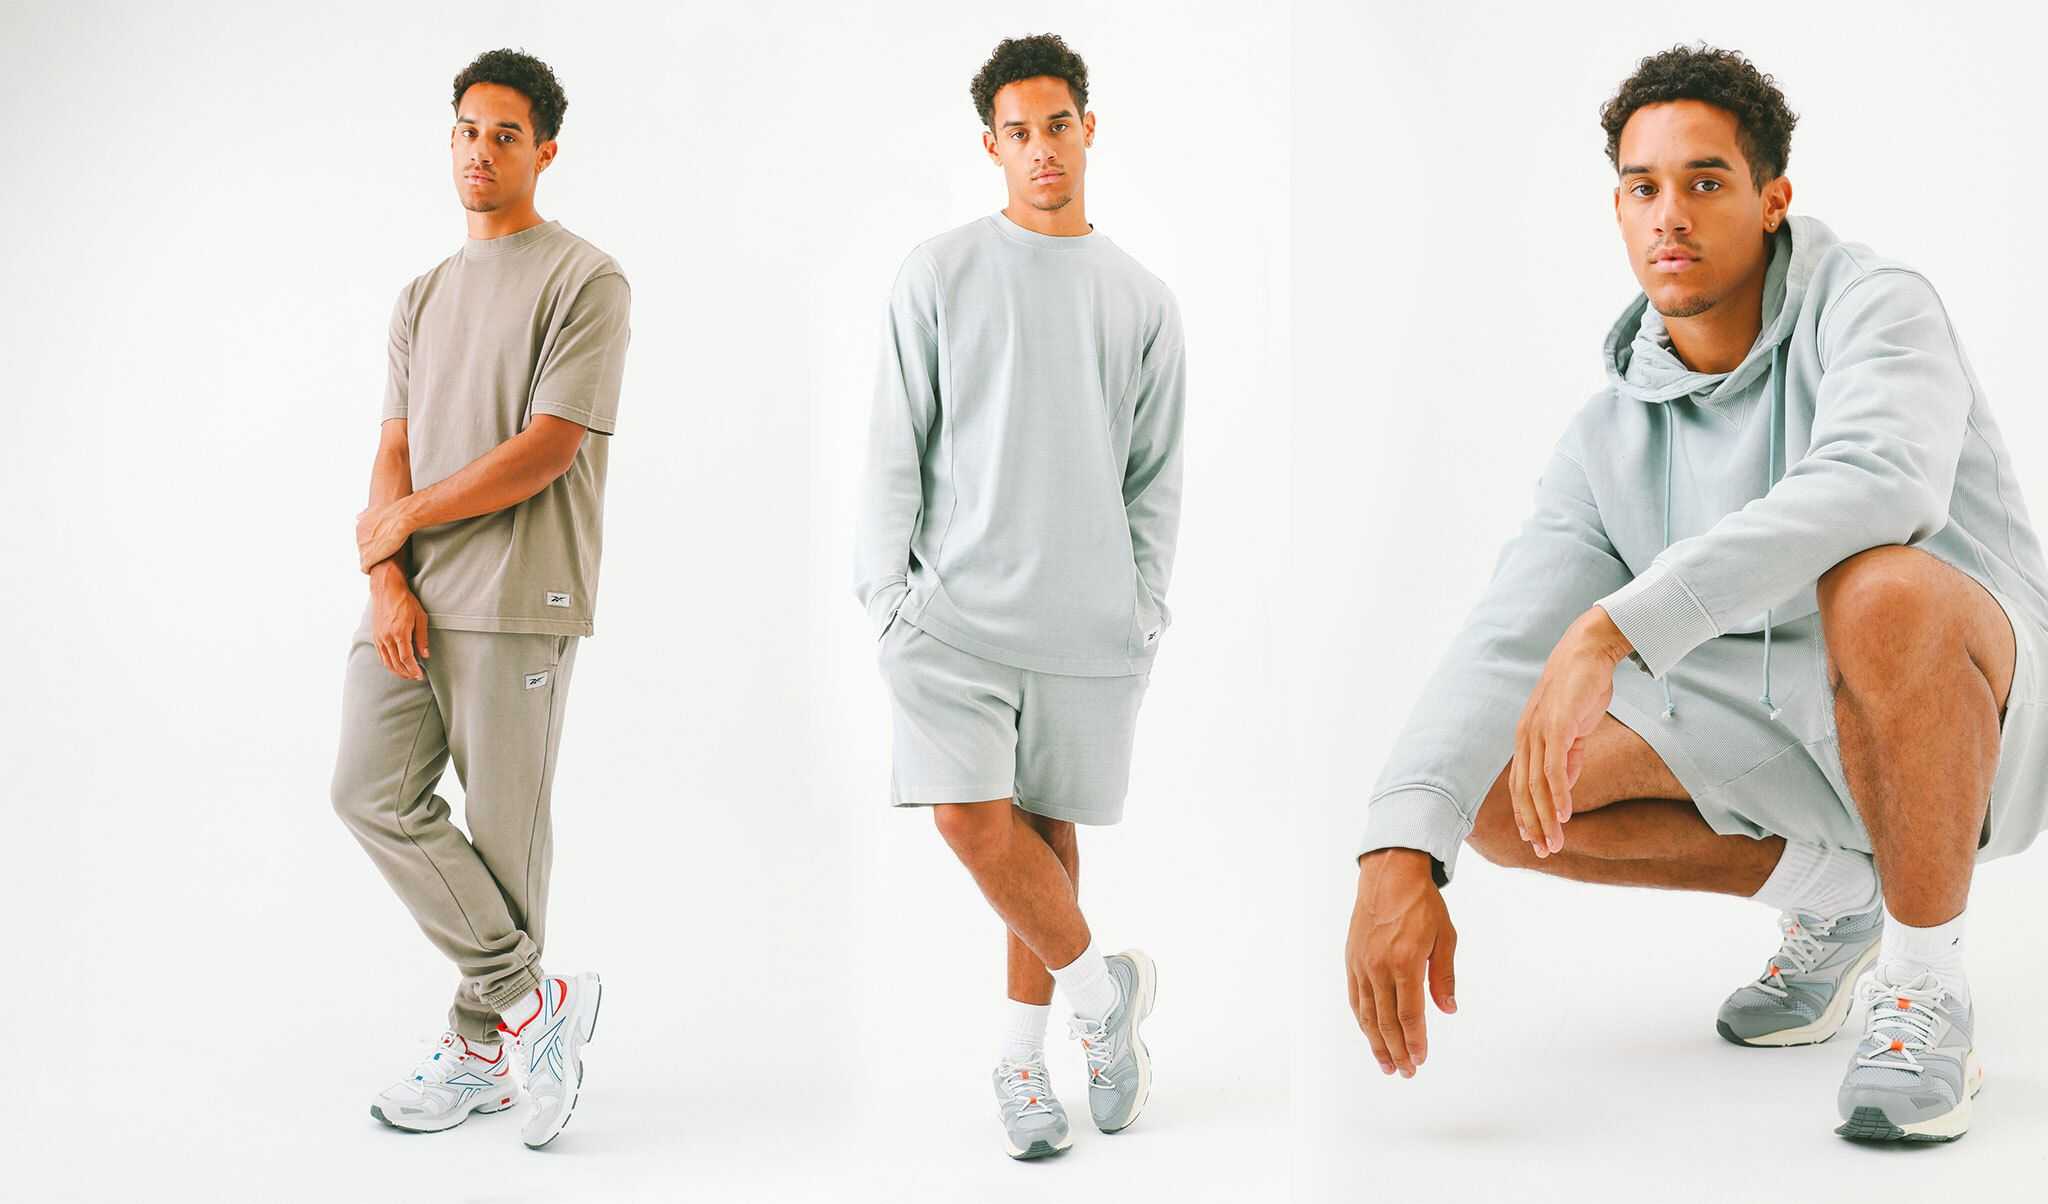 The Reebok natural dye collection